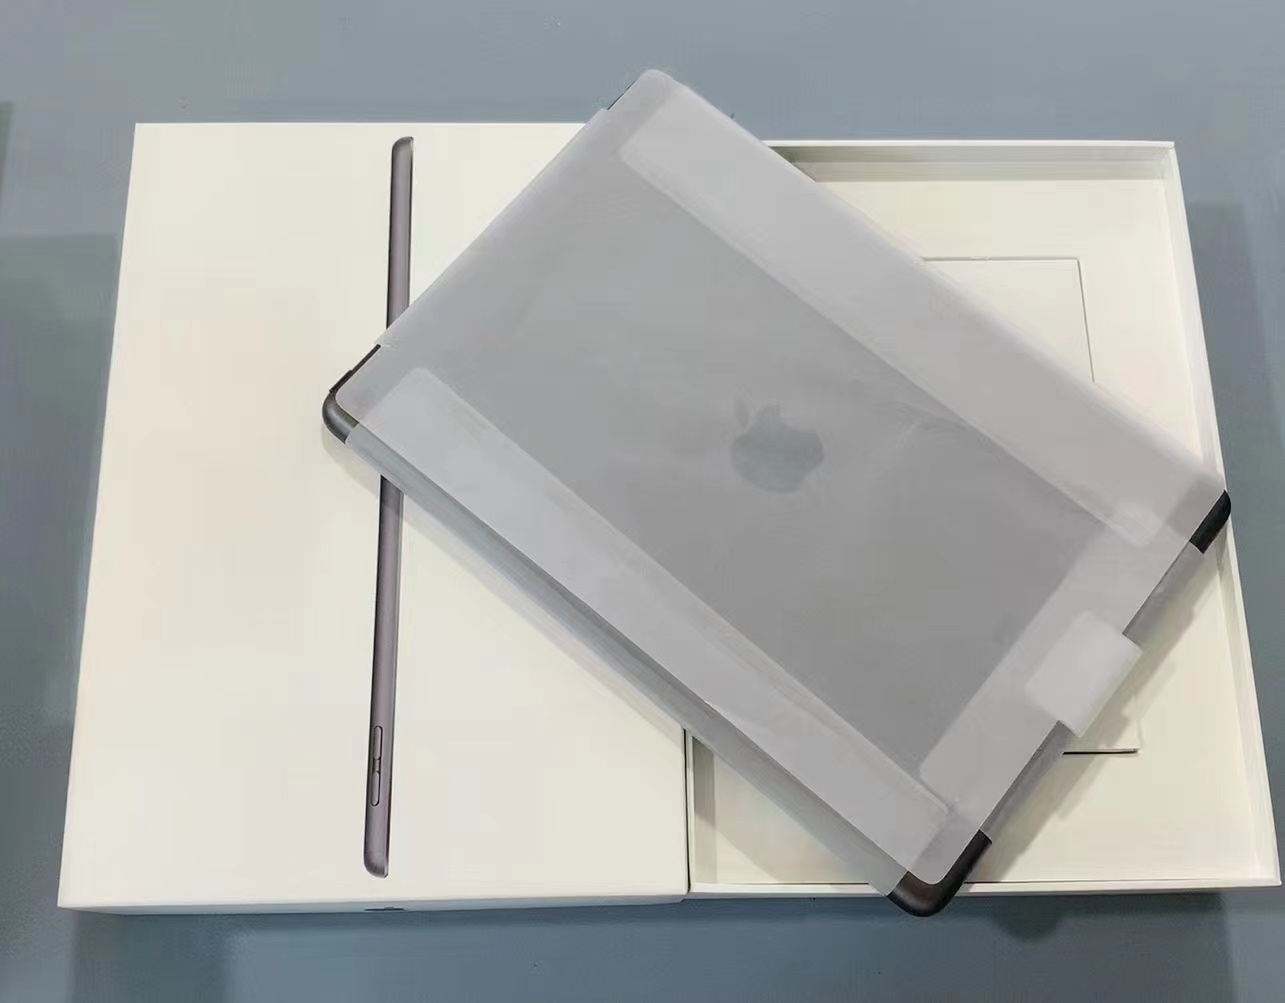 Review Roundup: 9.7" iPad Pro is a 'Powerful' Laptop Replacement for ...